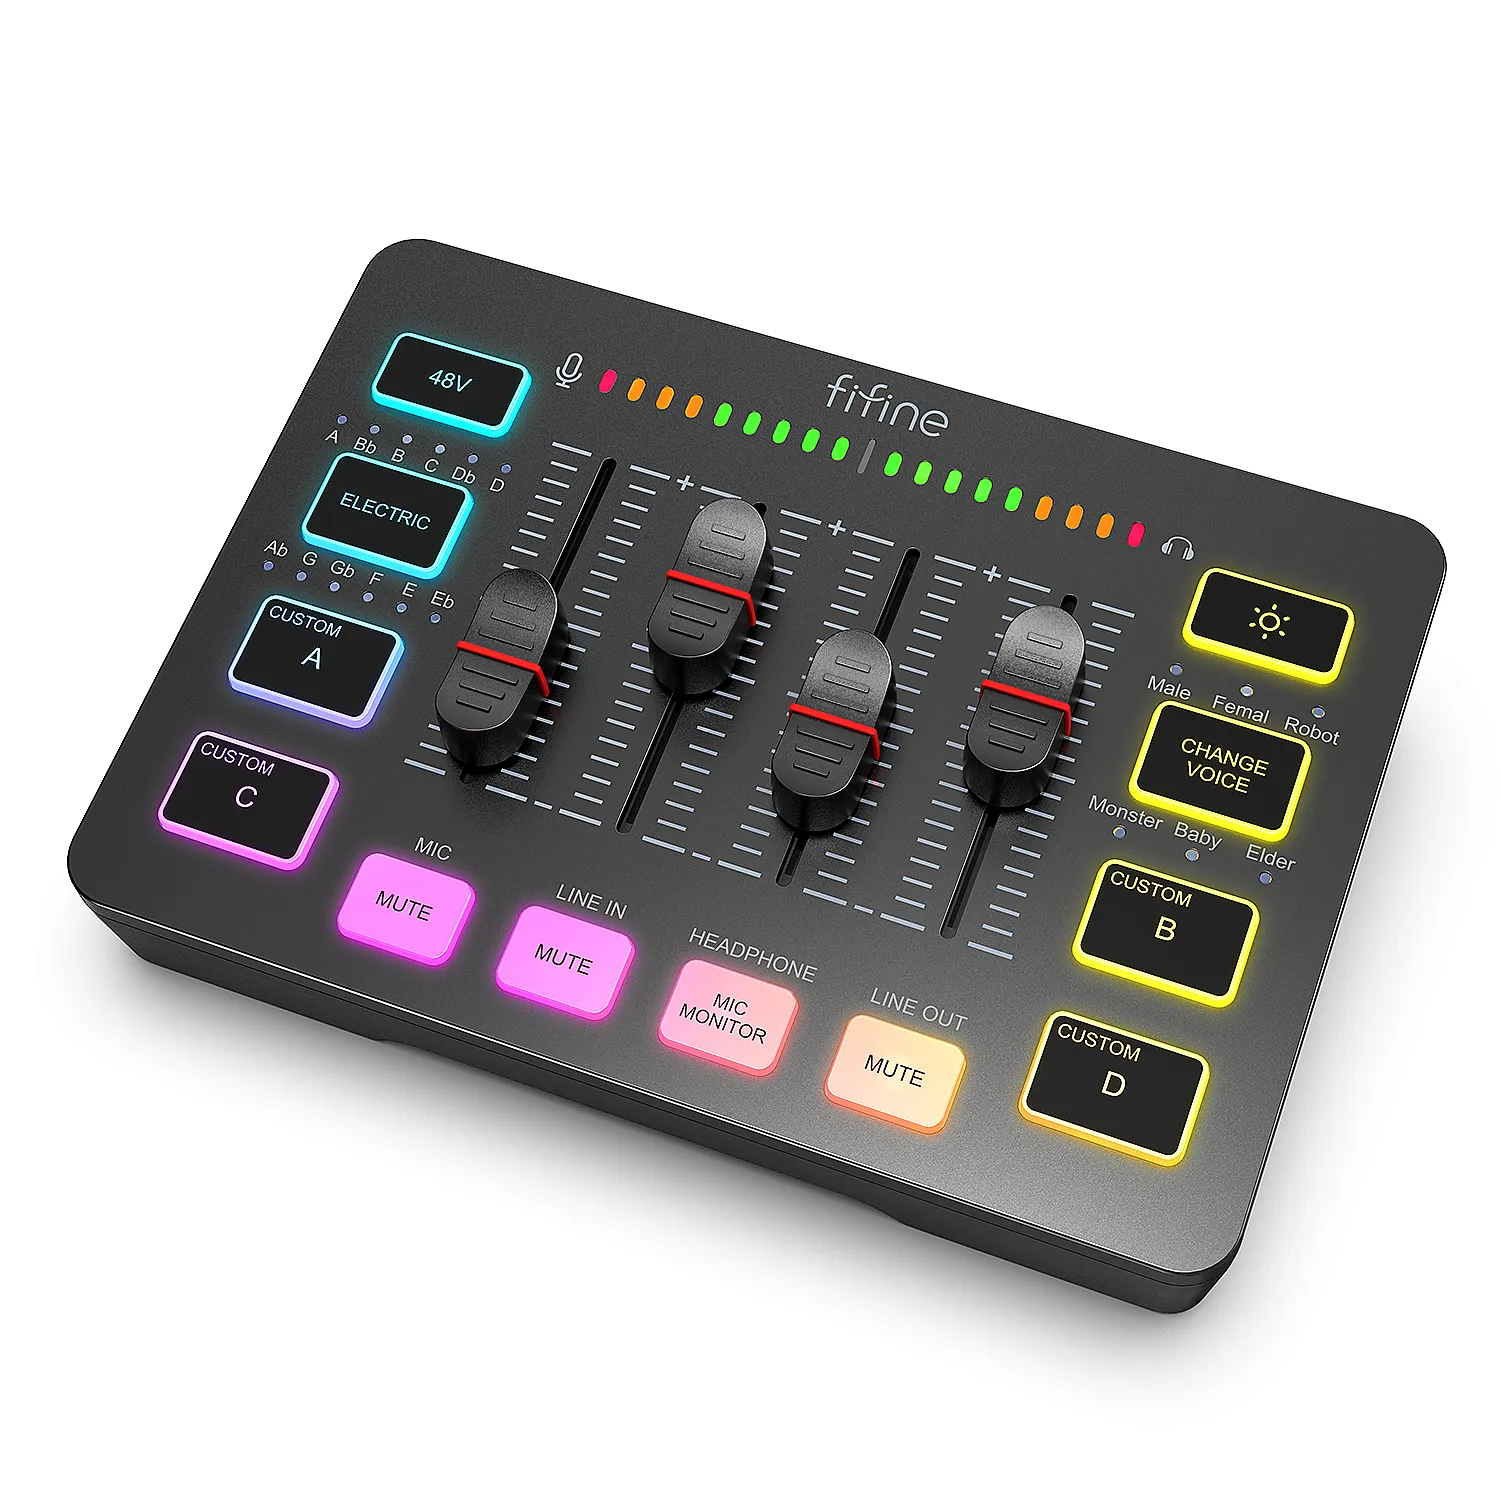 FIFINE-Gaming-Audio-Mixer-Streaming-4-Channel-RGB-Mixer-with-XLR-Microphone-Interface-for-Game-Voice.webp